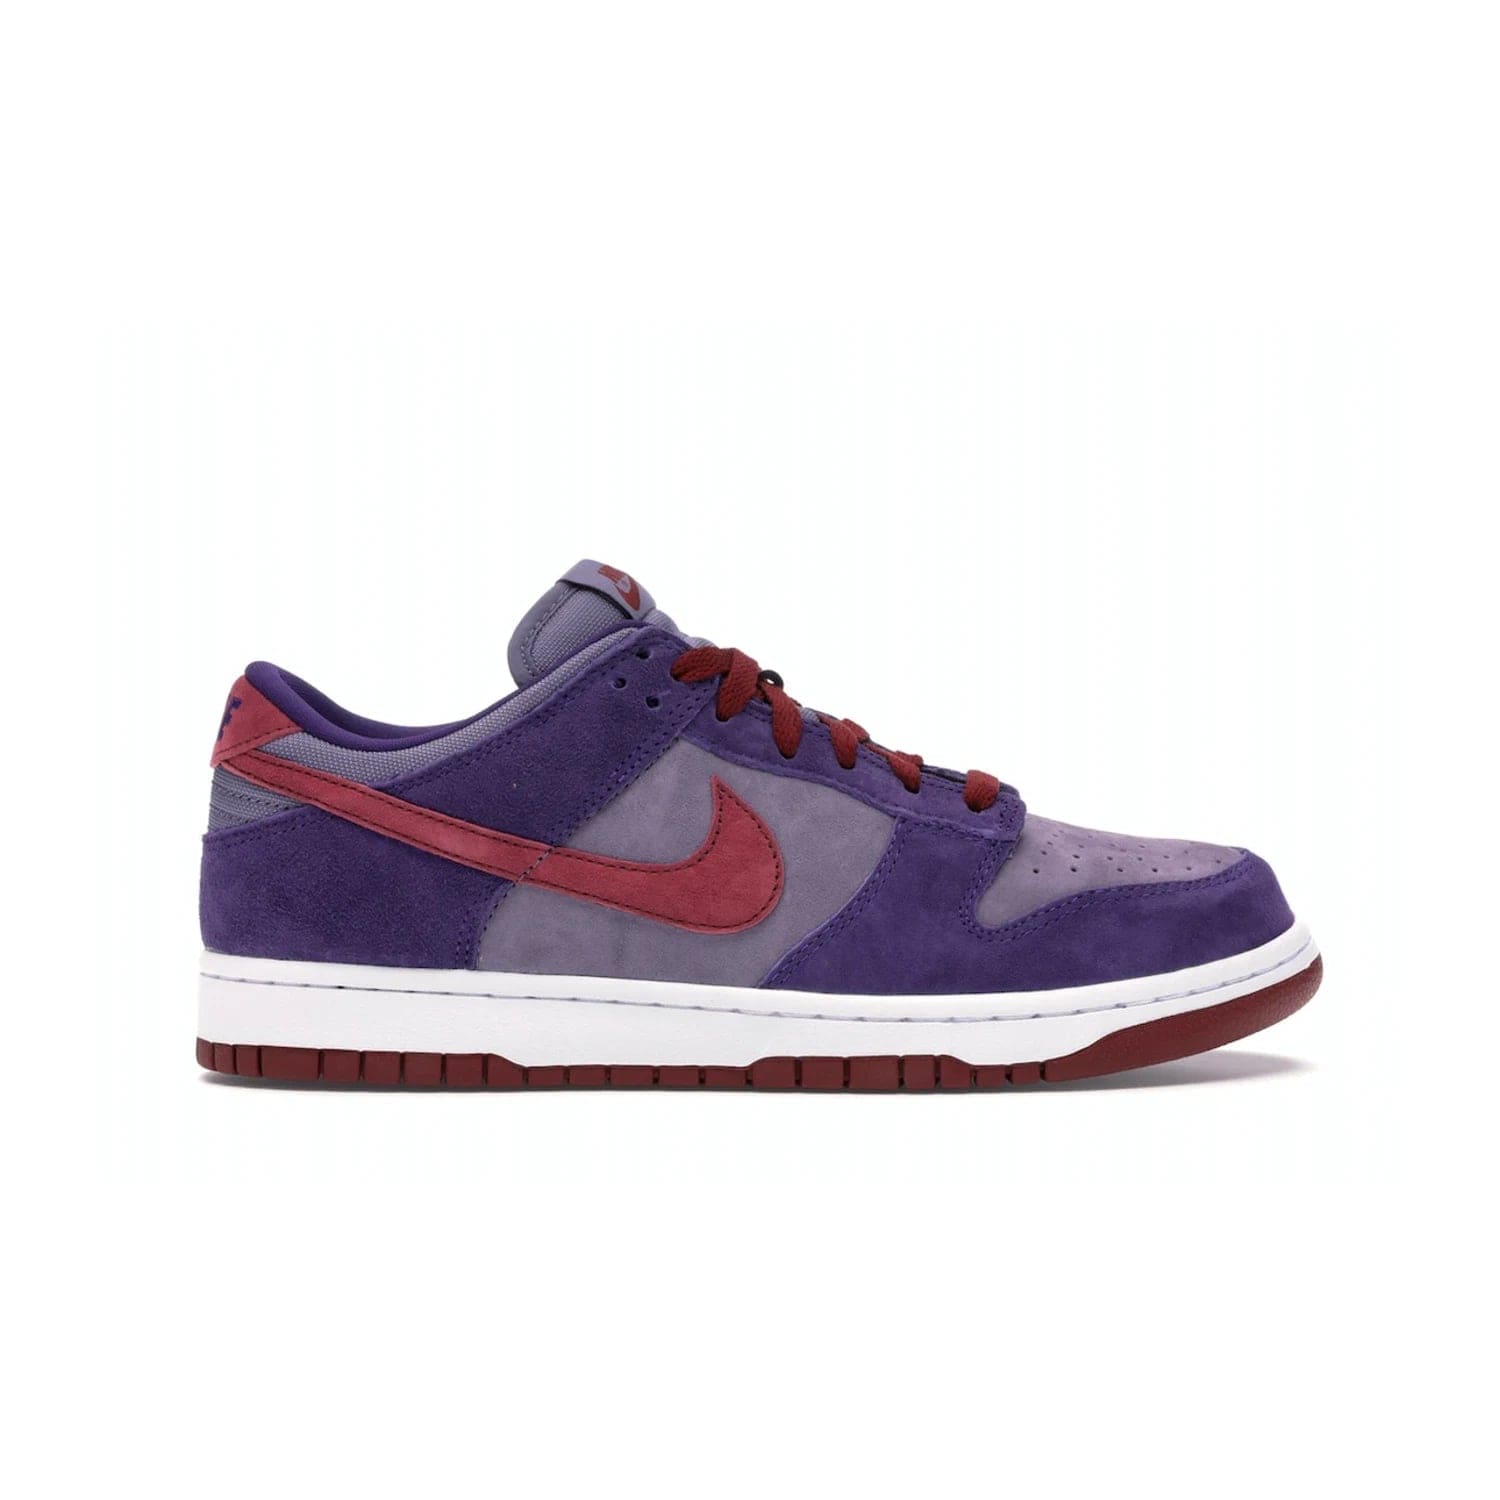 Nike Dunk Low Plum (2020) - Image 1 - Only at www.BallersClubKickz.com - Elevate your look with the Nike Dunk Low Plum (2020). Featuring a bold purple colorway, this retro-inspired silhouette is constructed of premium suede and makes for a must-have for any sneakerhead.